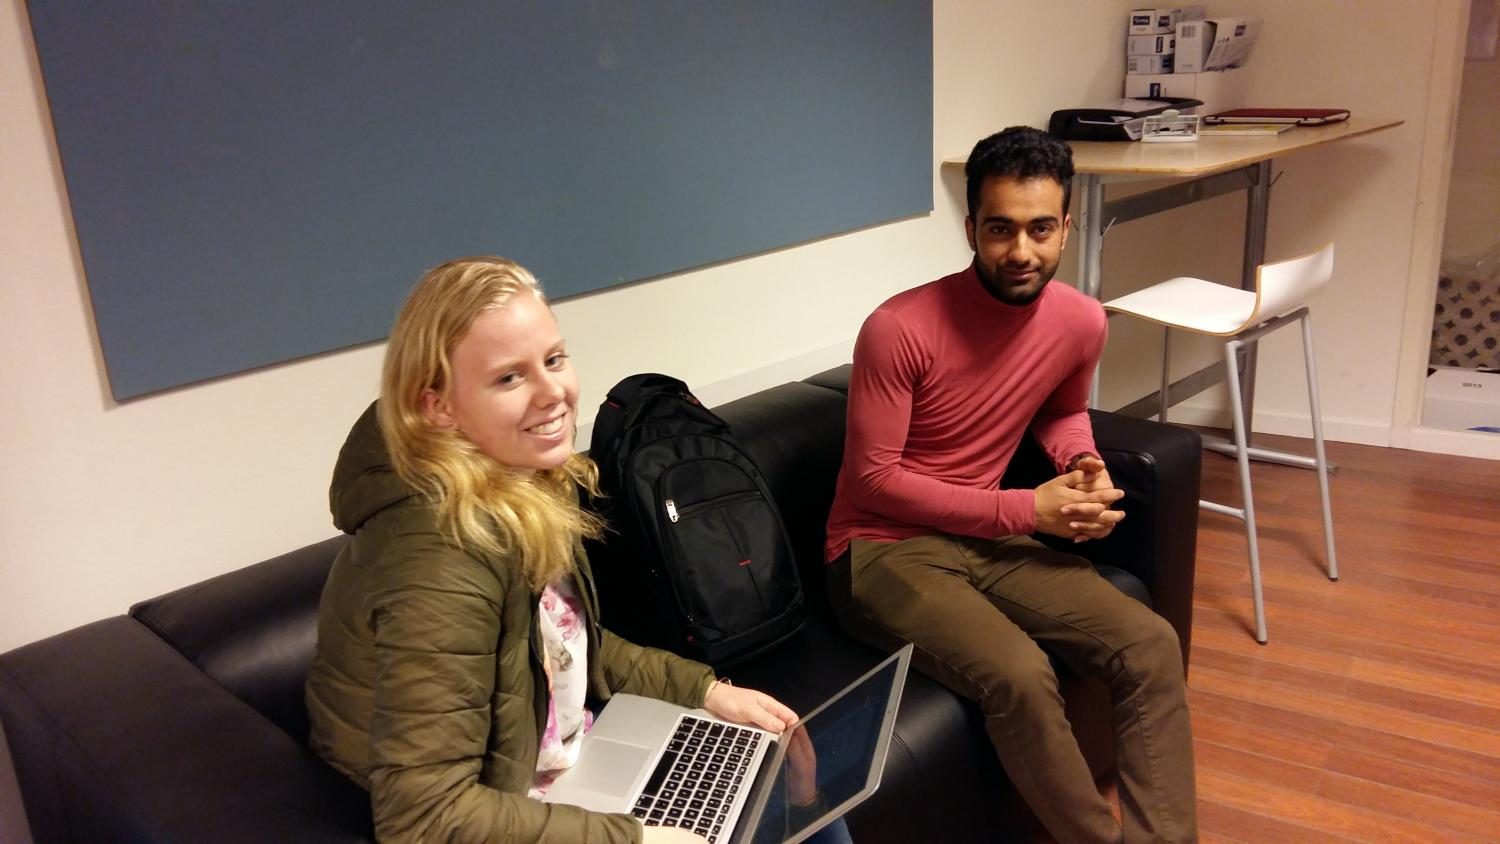 Our QQ editor Sophie and Shahram 